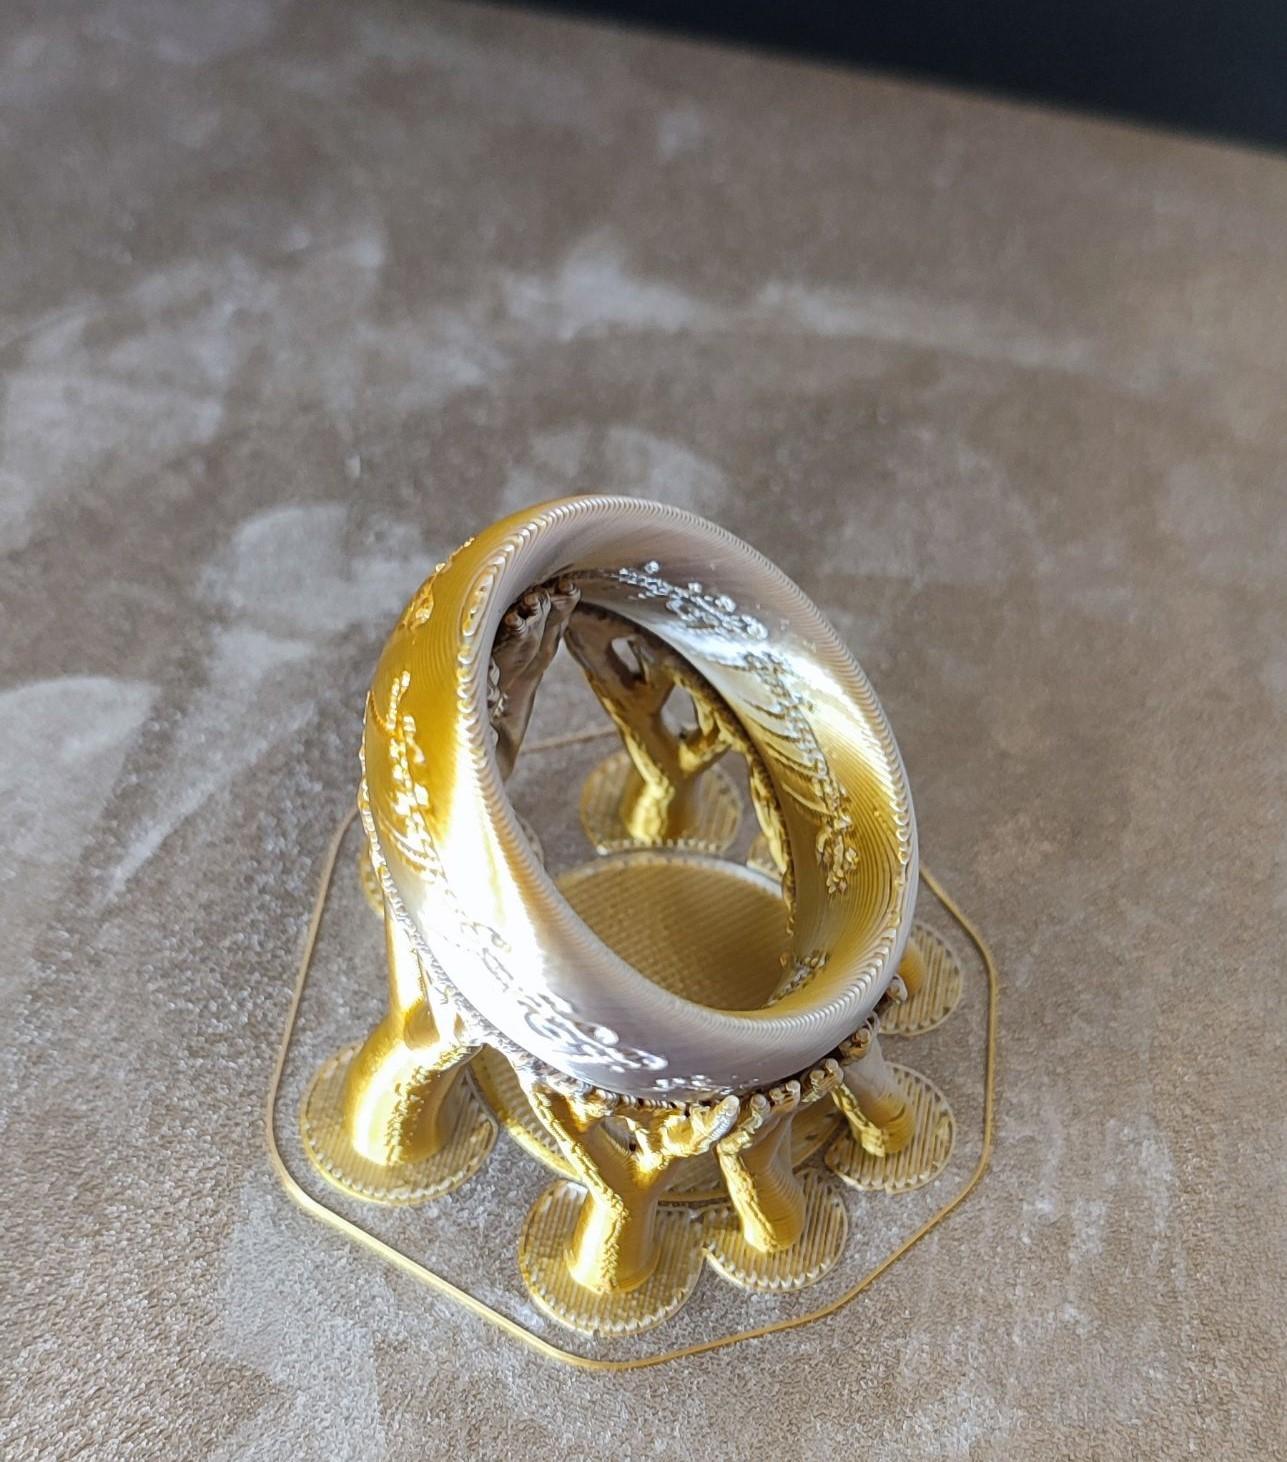 The One ring organice support - My partner wanted a napkin ring and they are very happy about the results, and so am I :D - 3d model